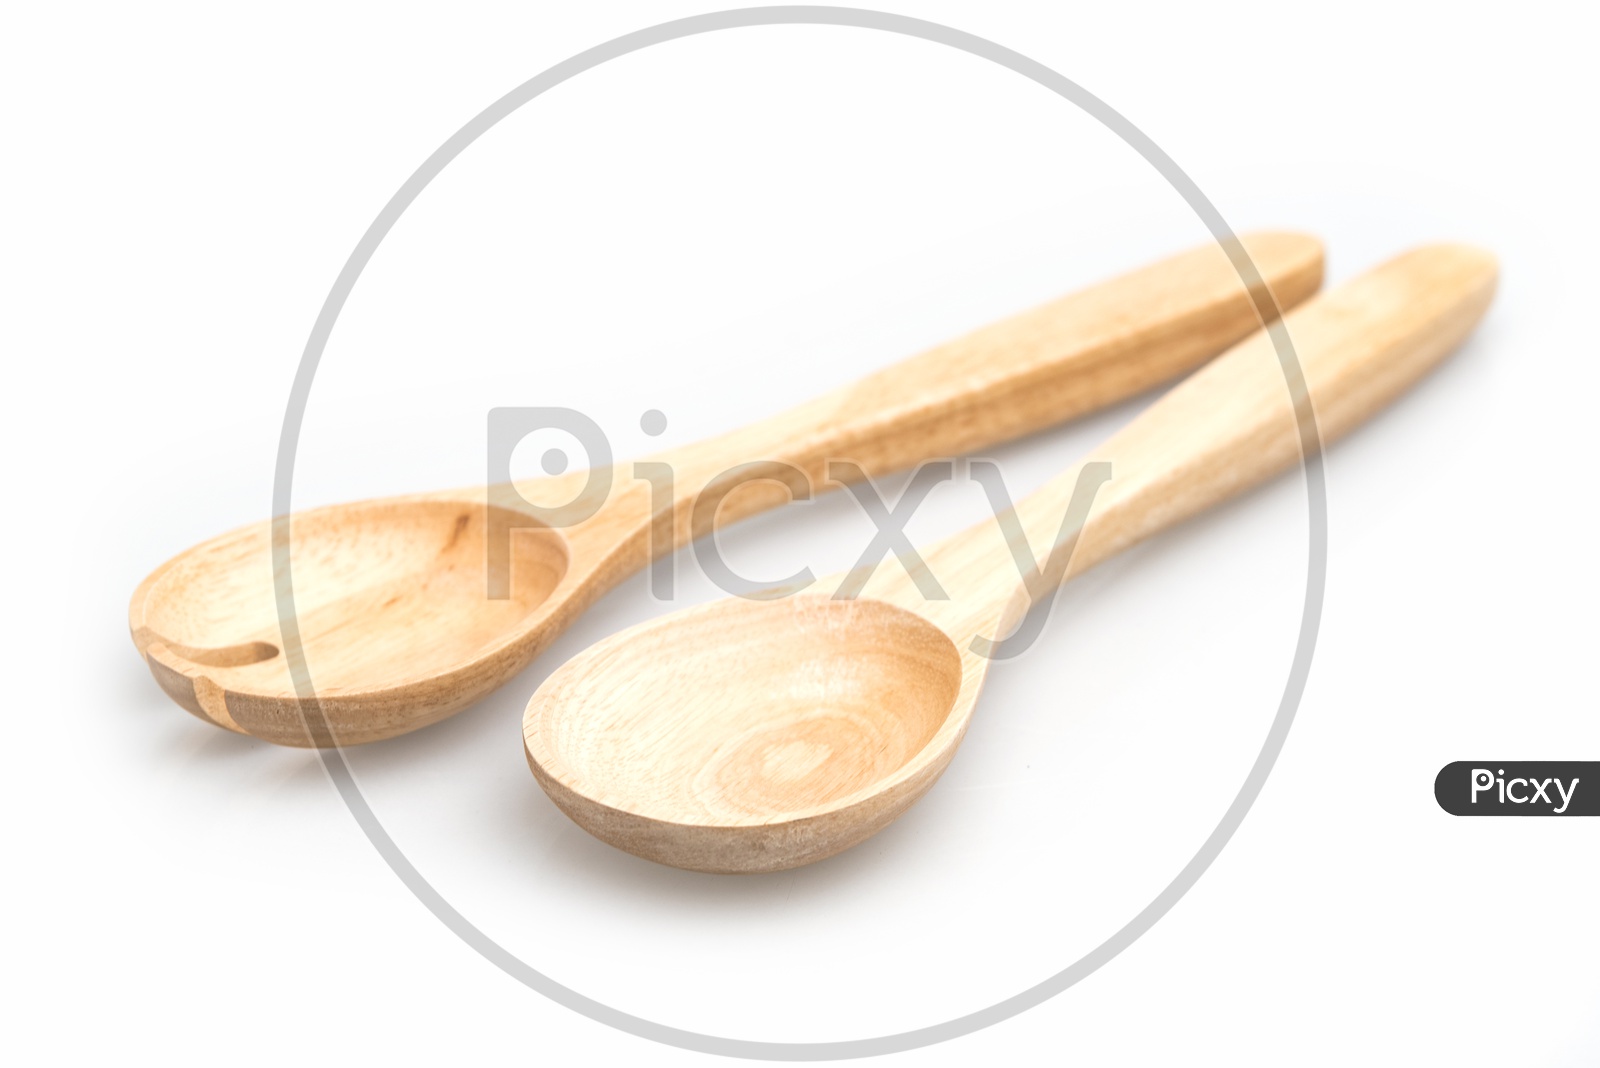 Kitchen accessories tools made of wood isolated on white background